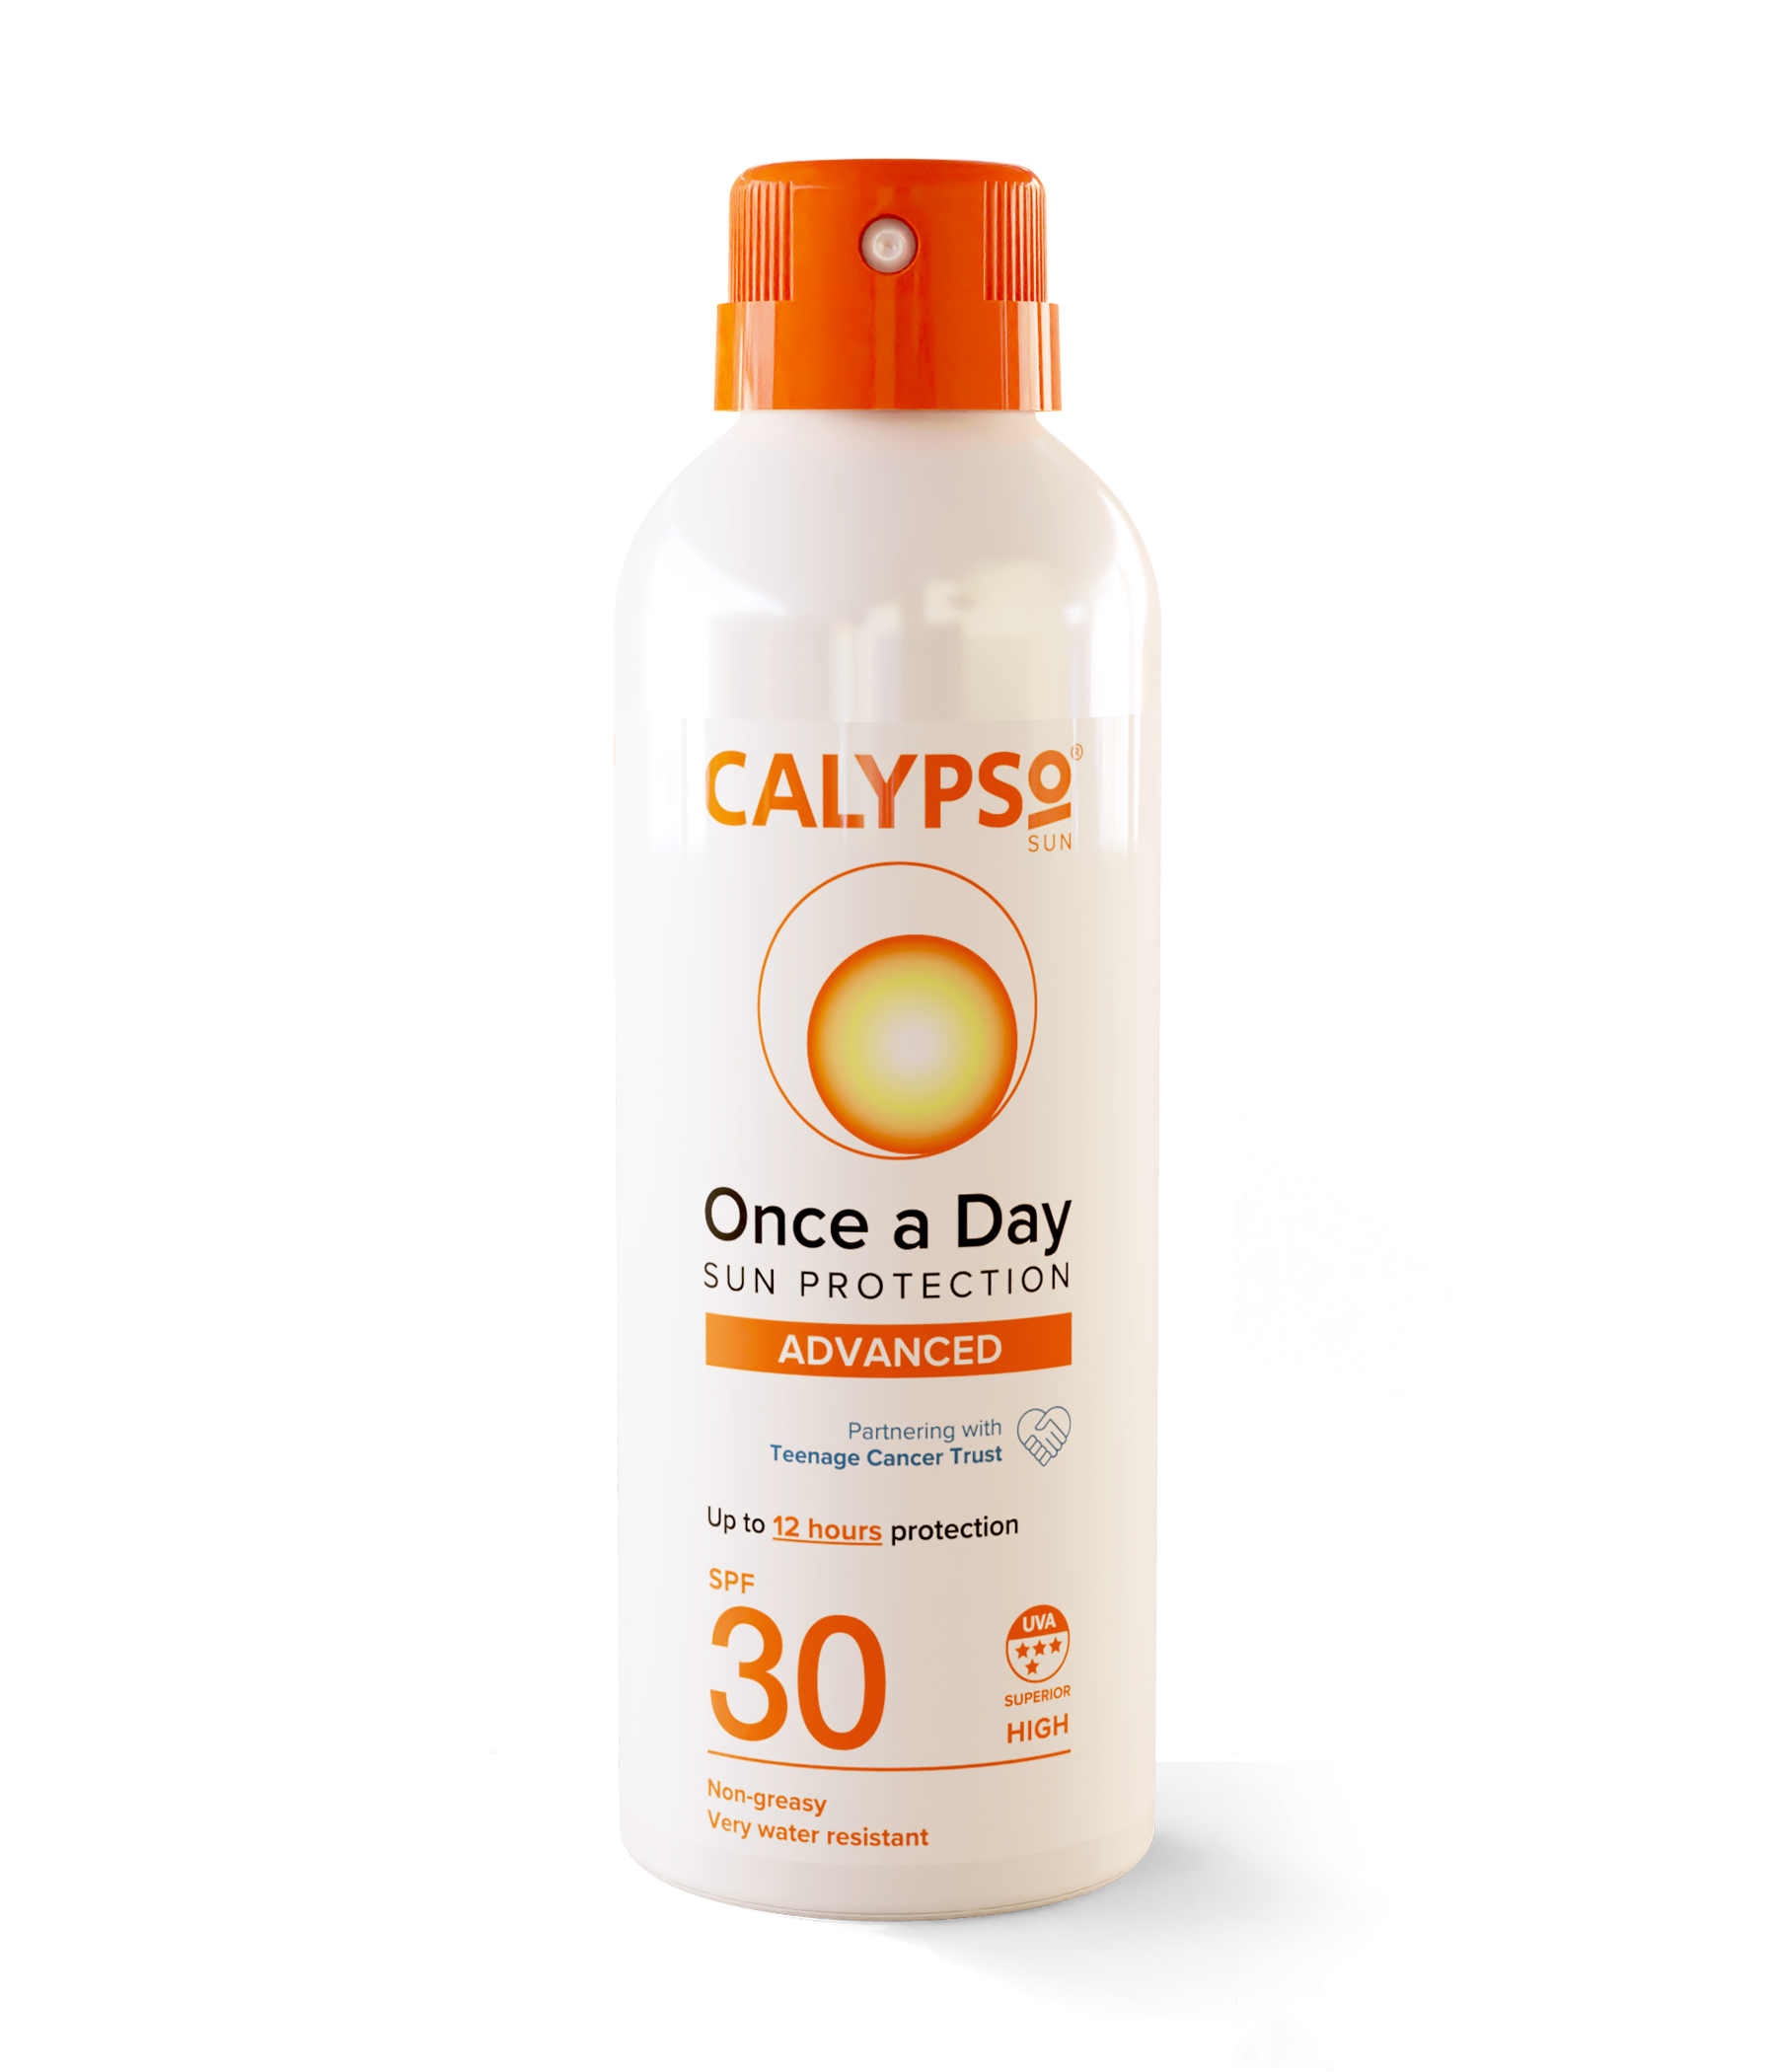 Calypso Once a Day Spray SPF 30, Very Water Resistant